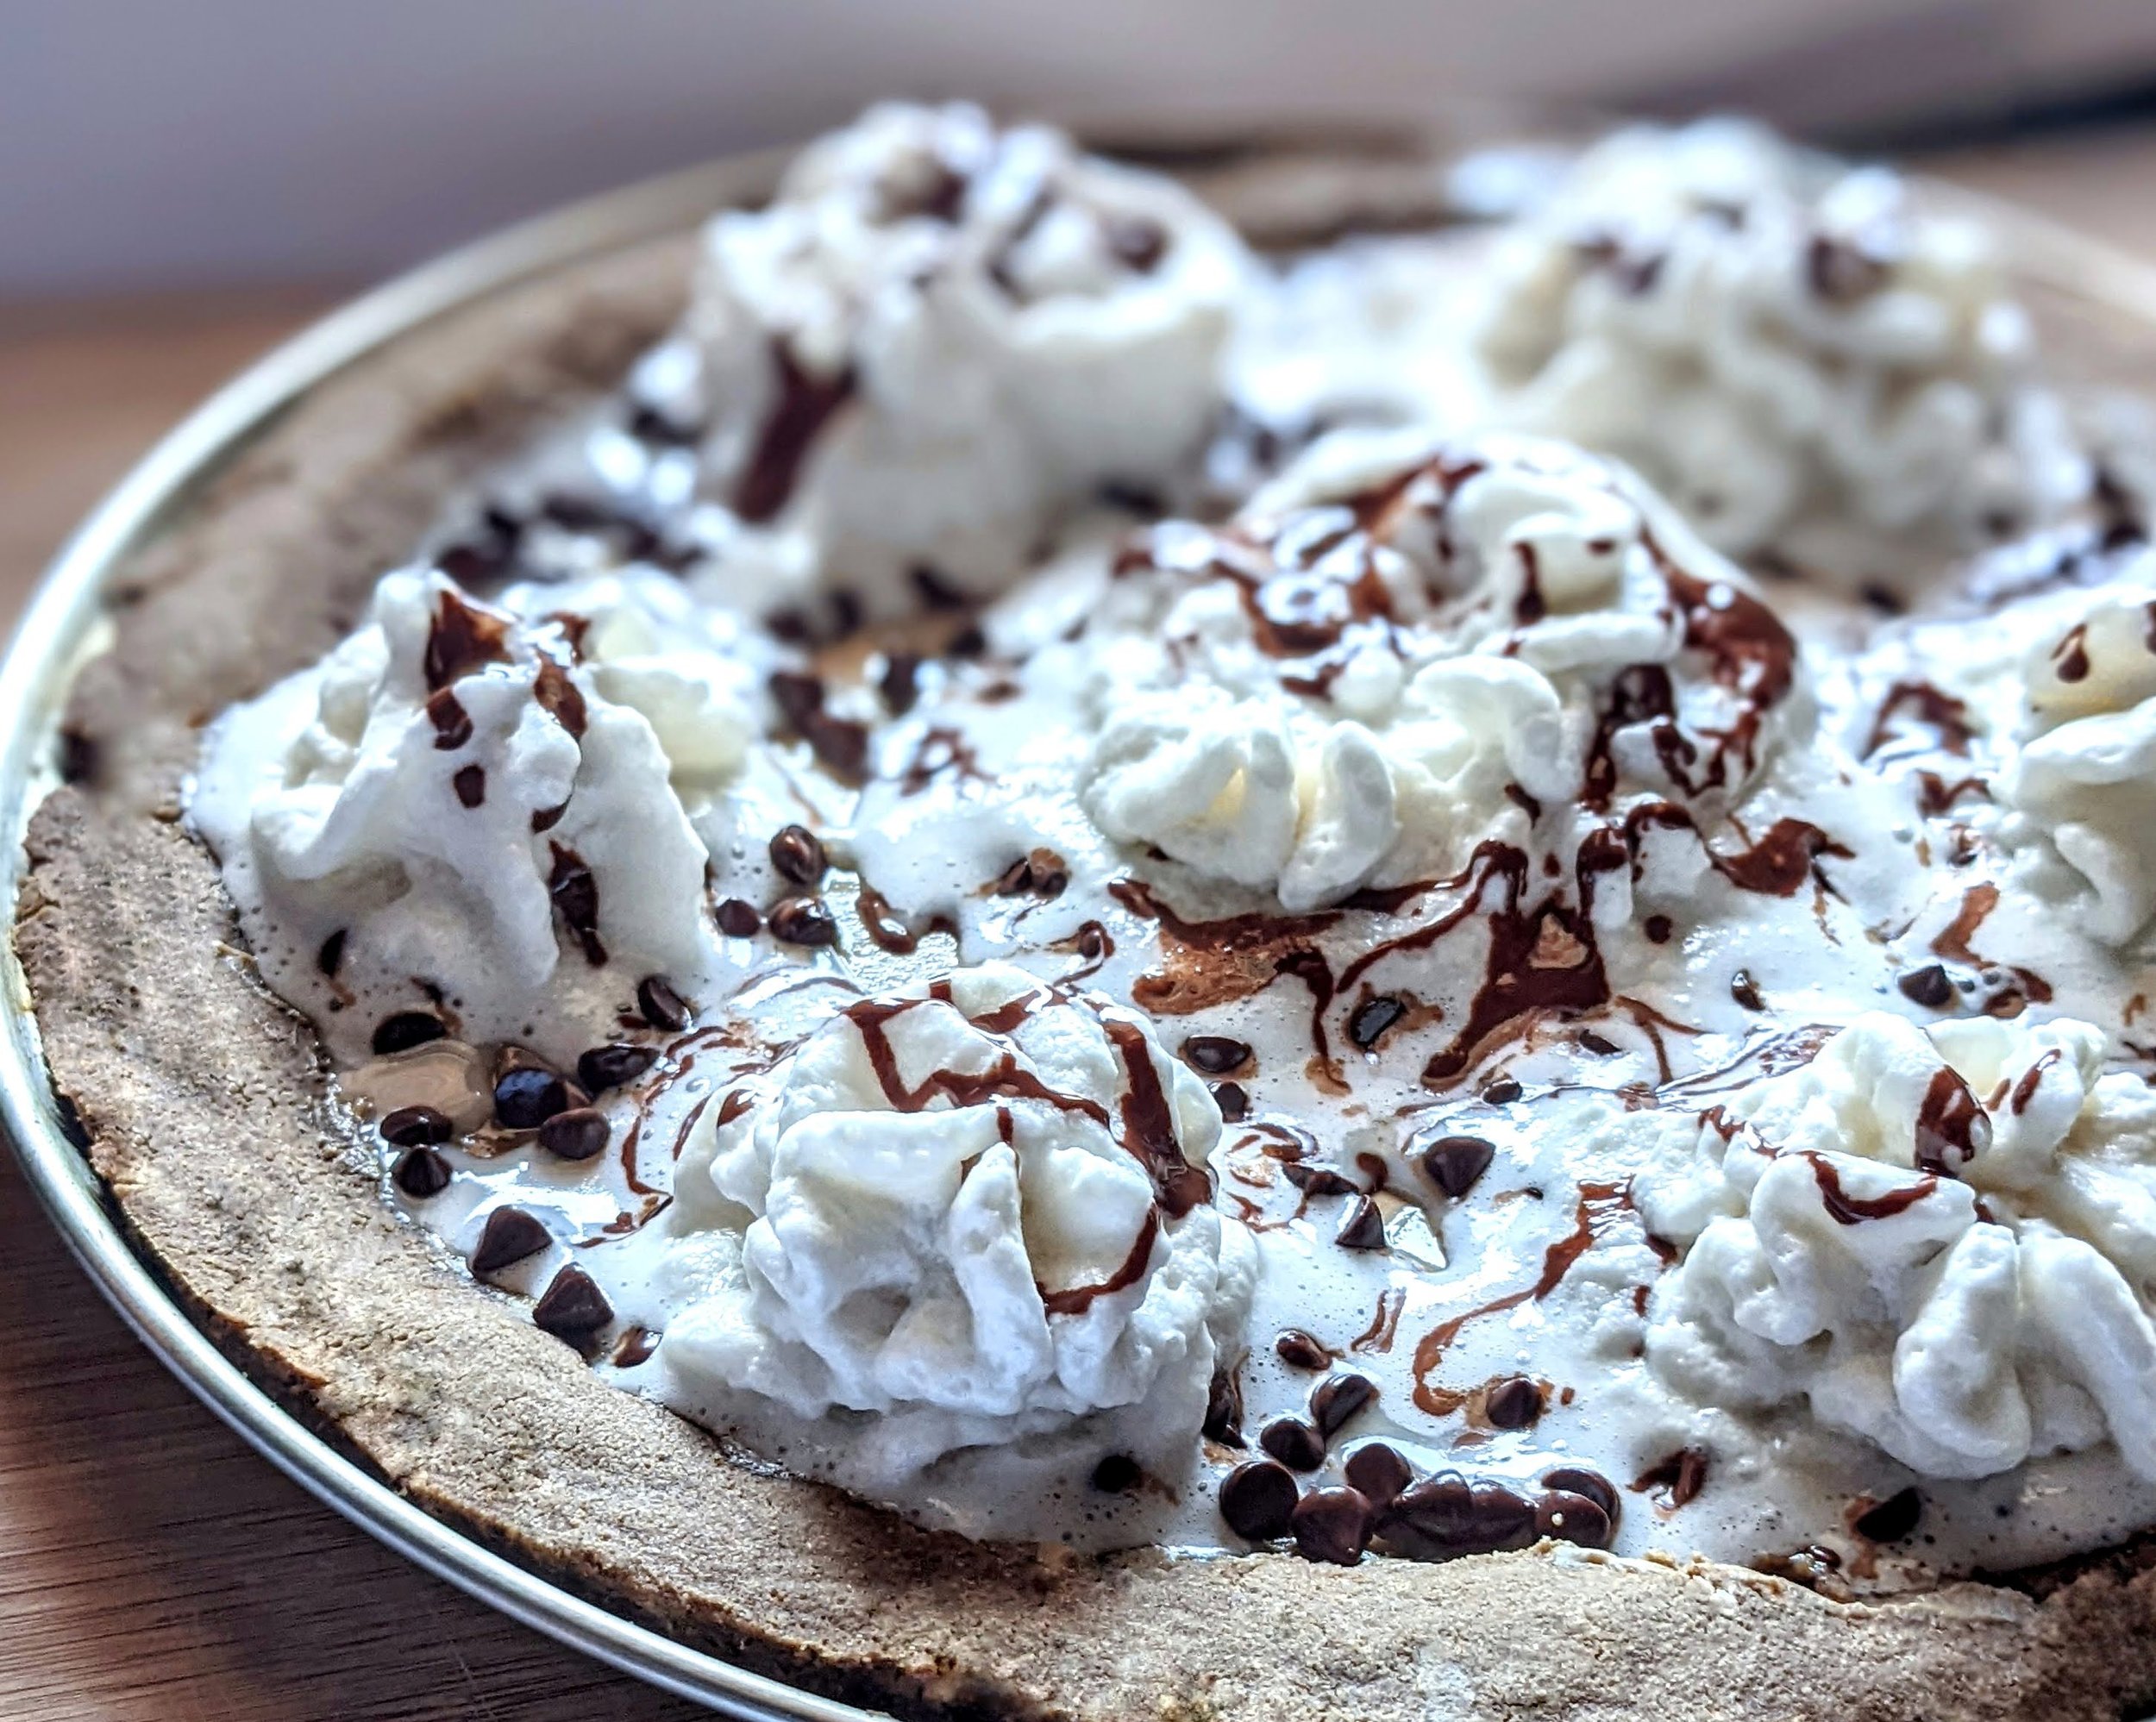 Bare Life Hot Chocolate Pizza Dough sunfun butter & choco chips whipped cream close up side.jpeg